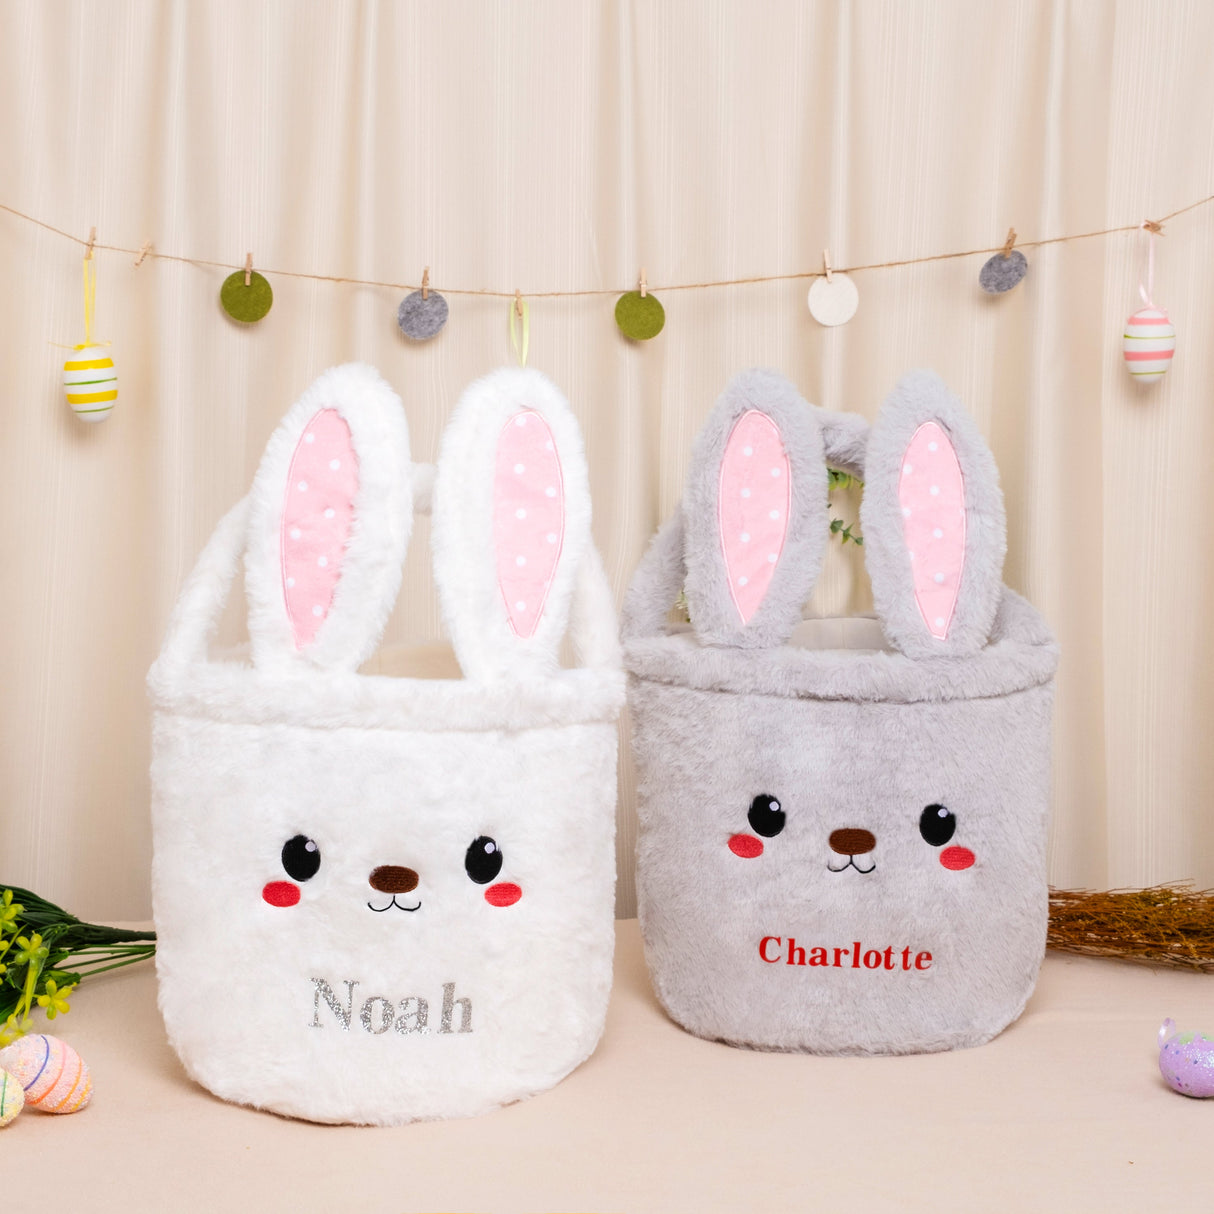 GEX Personalized Easter Bunny Basket Kids Plush Bunny Basket with Name - GexWorldwide